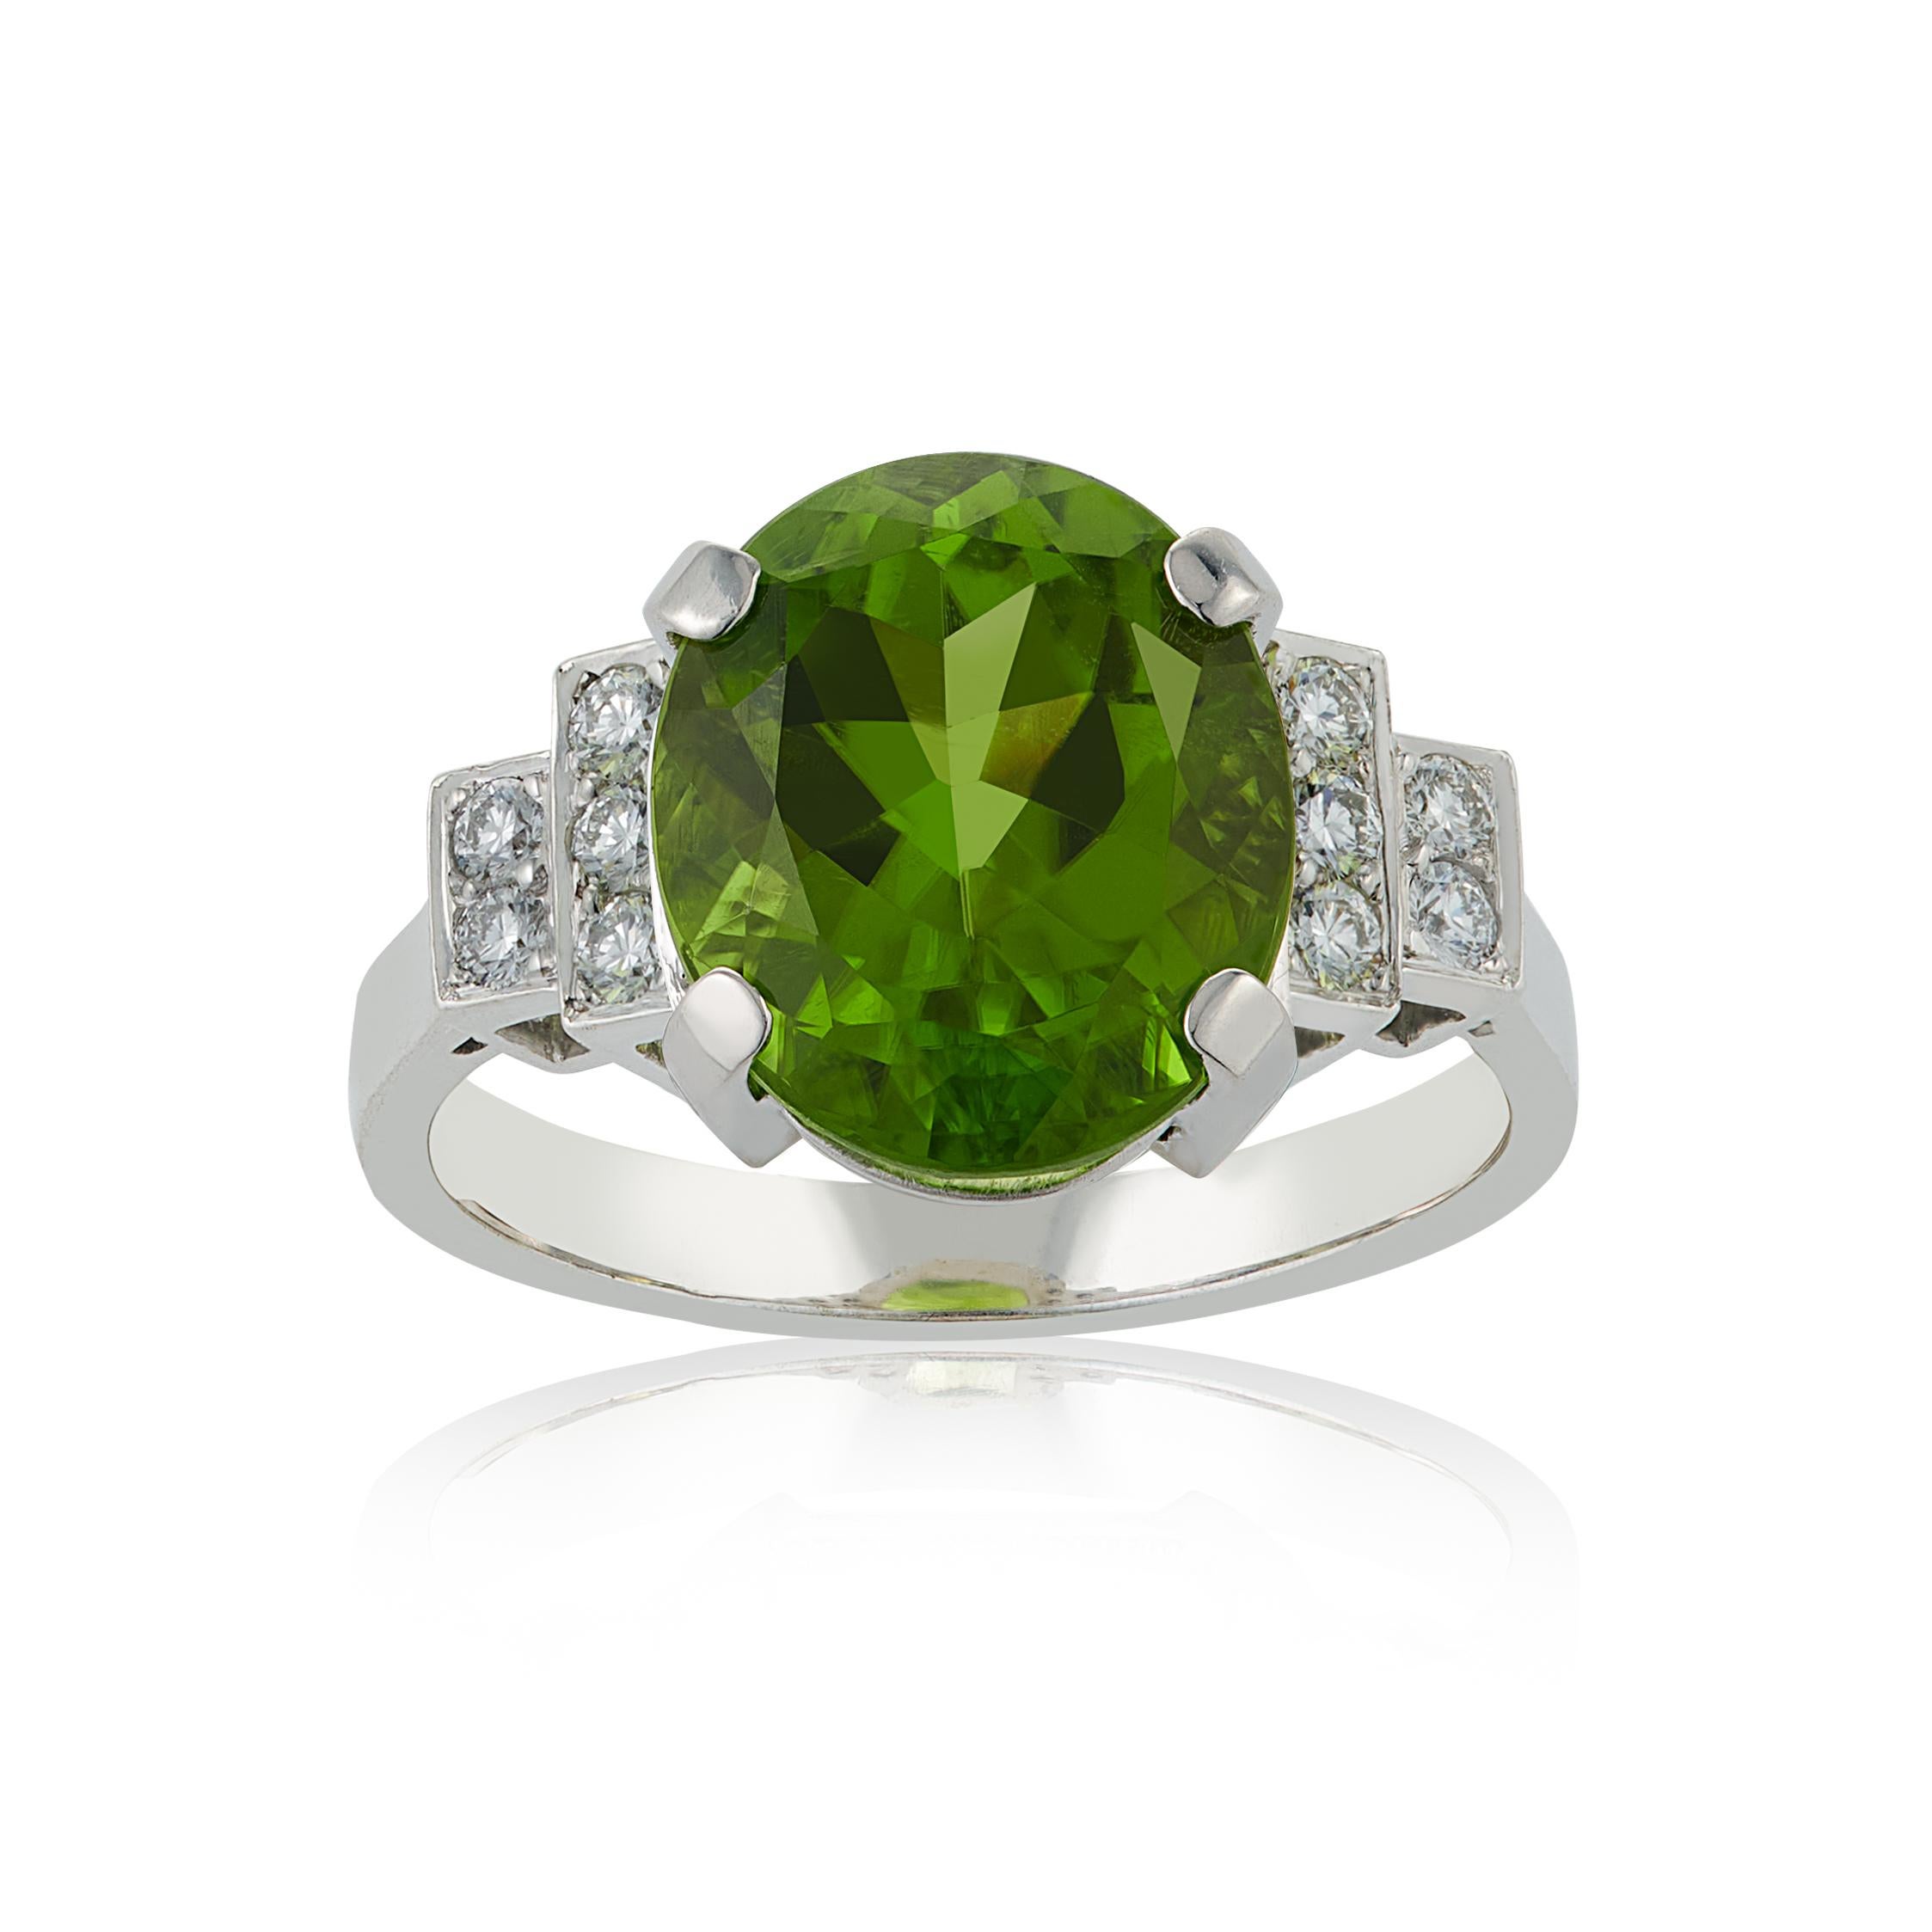 E Wolfe & Company Handmade 18ct White Gold Peridot and Diamond Cocktail Ring. The peridot centre stone weighs 7.12 carats and either side of the centre stone are pave-set diamonds set to stepped shoulders. 
The diamonds have a total weight of .28